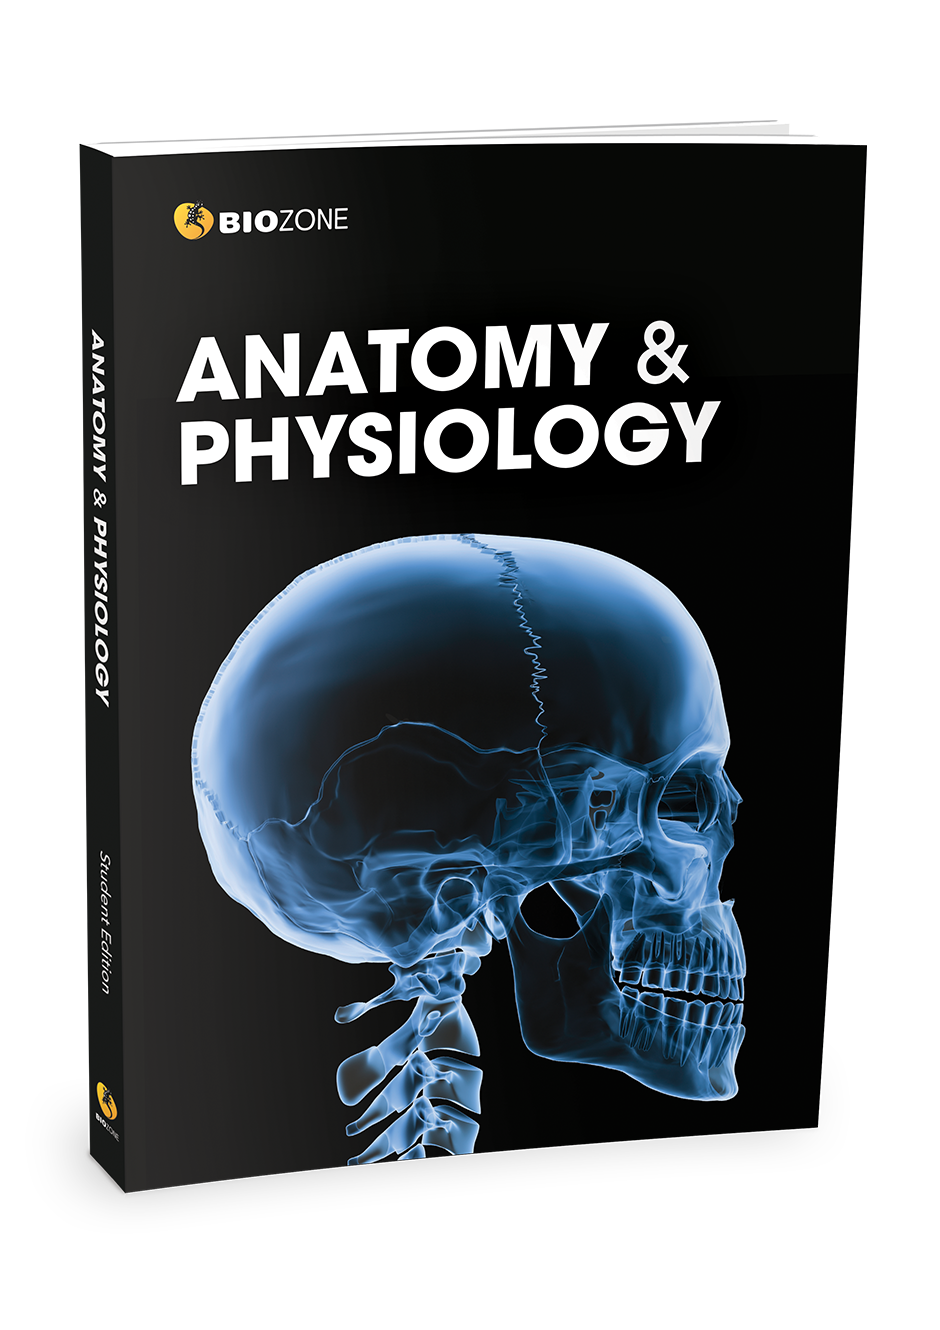 anatomy and physiology with xray skull on front cover of book